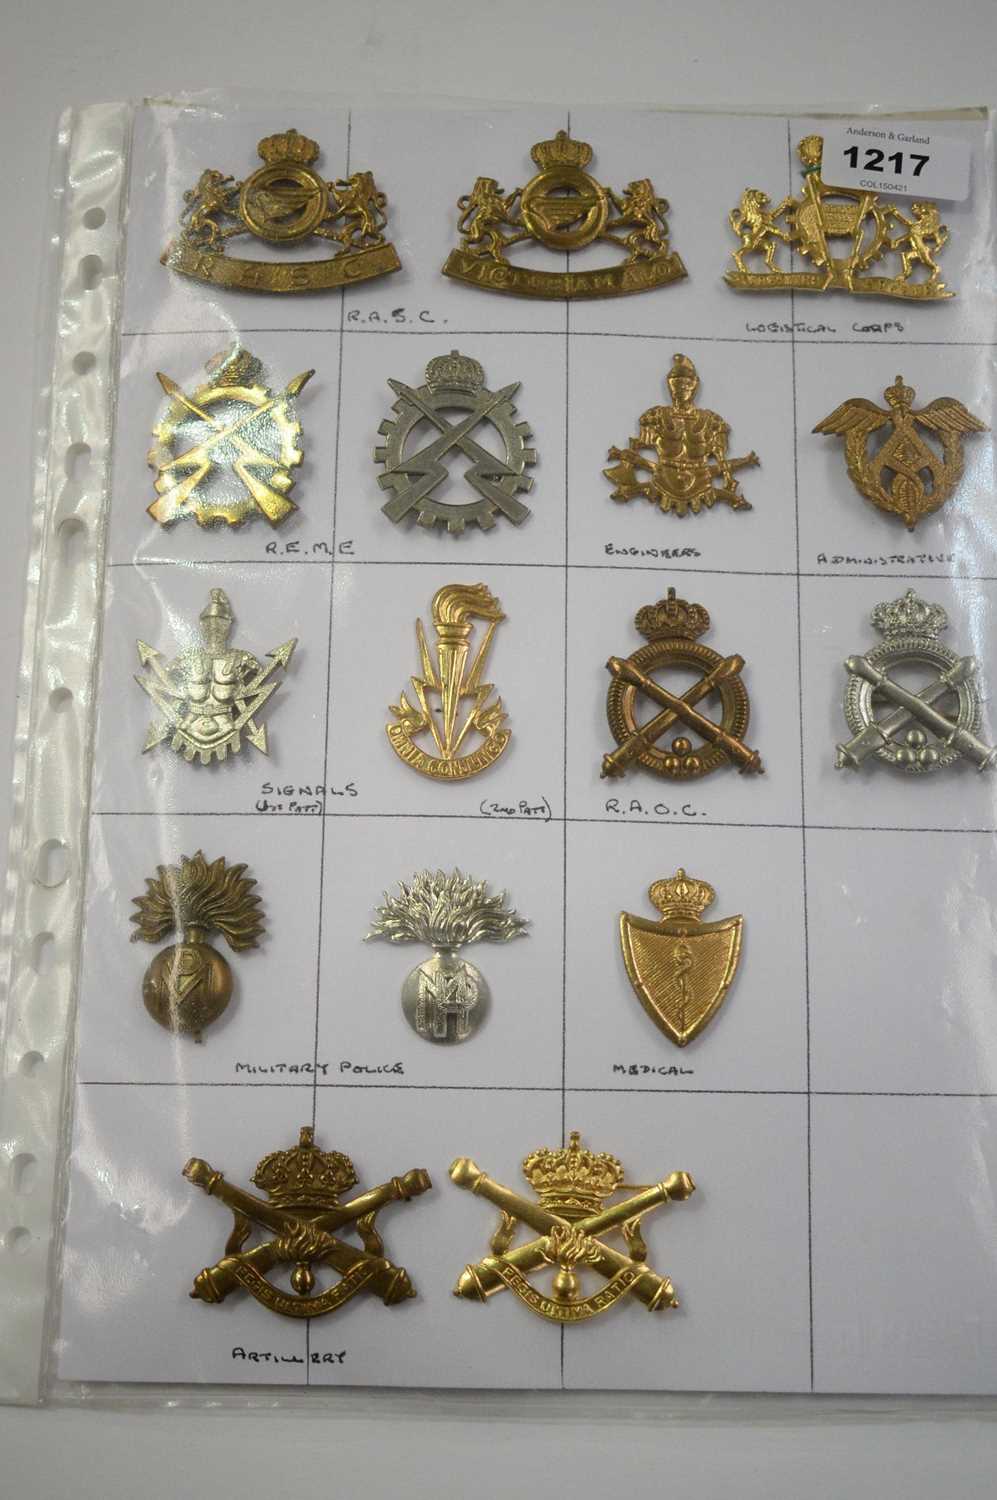 Lot 1217 - A collection of 16 Belgian Corps cap badges.